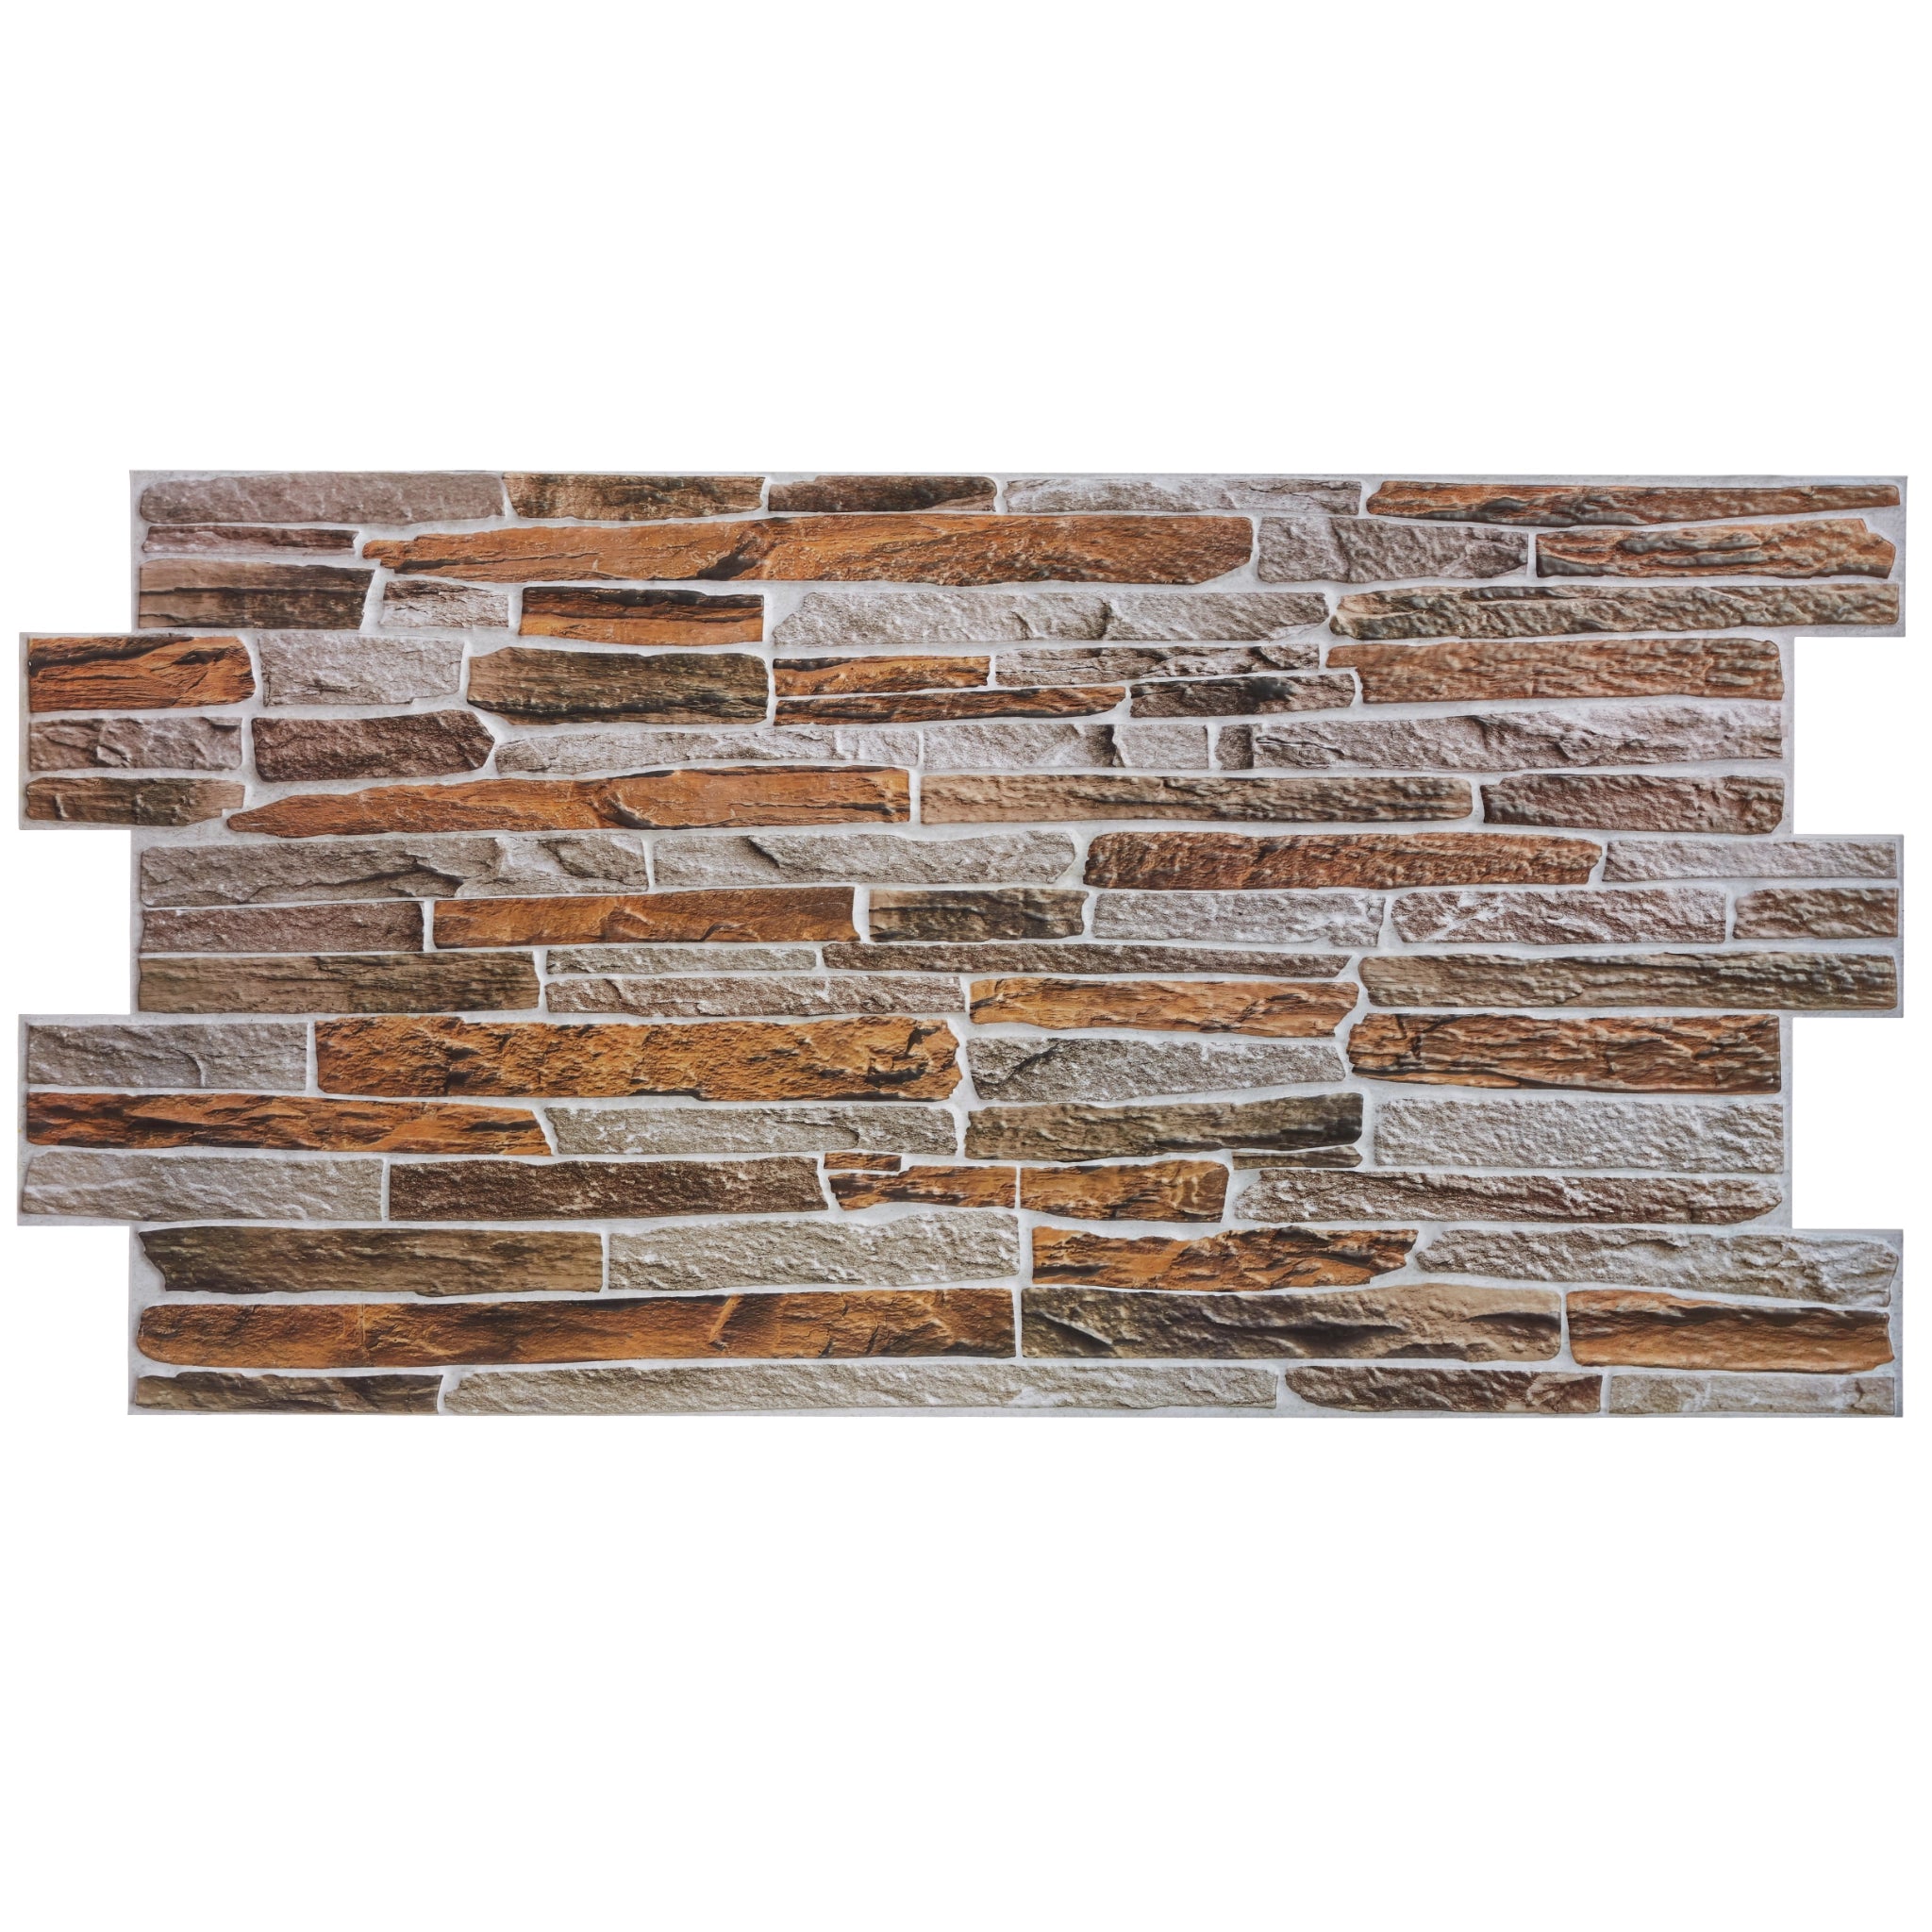 Natural sandstone wall panel with geometric patterns, close-up view